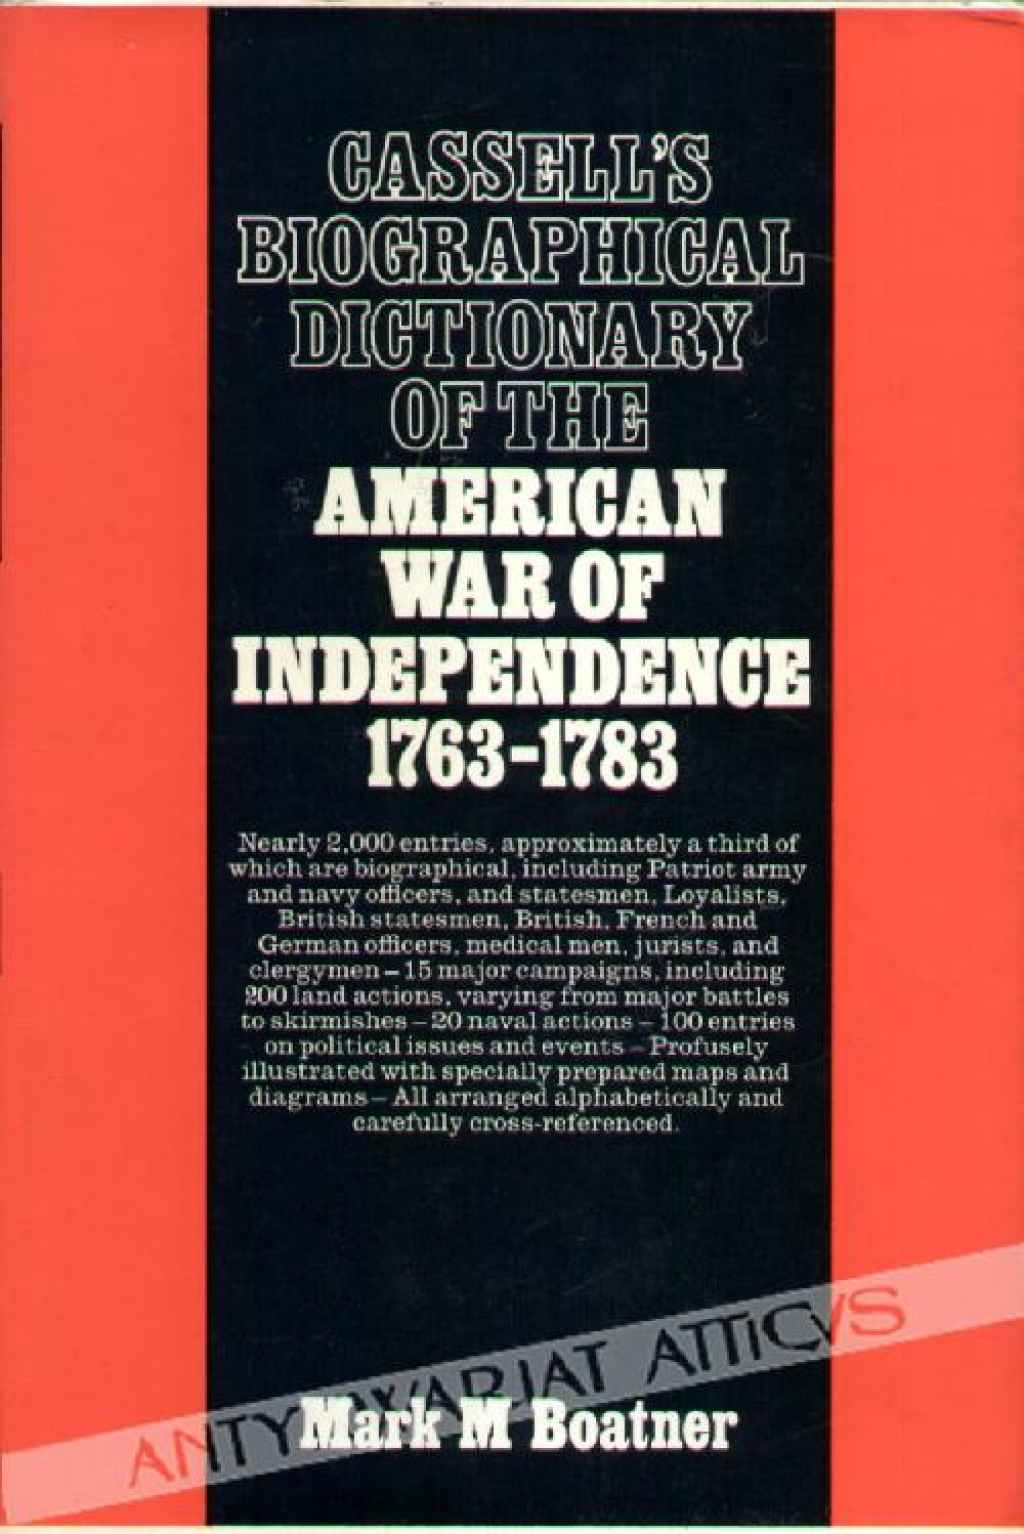 Cassell's Biographical Dictionary of the American War of Independence 1763-1783